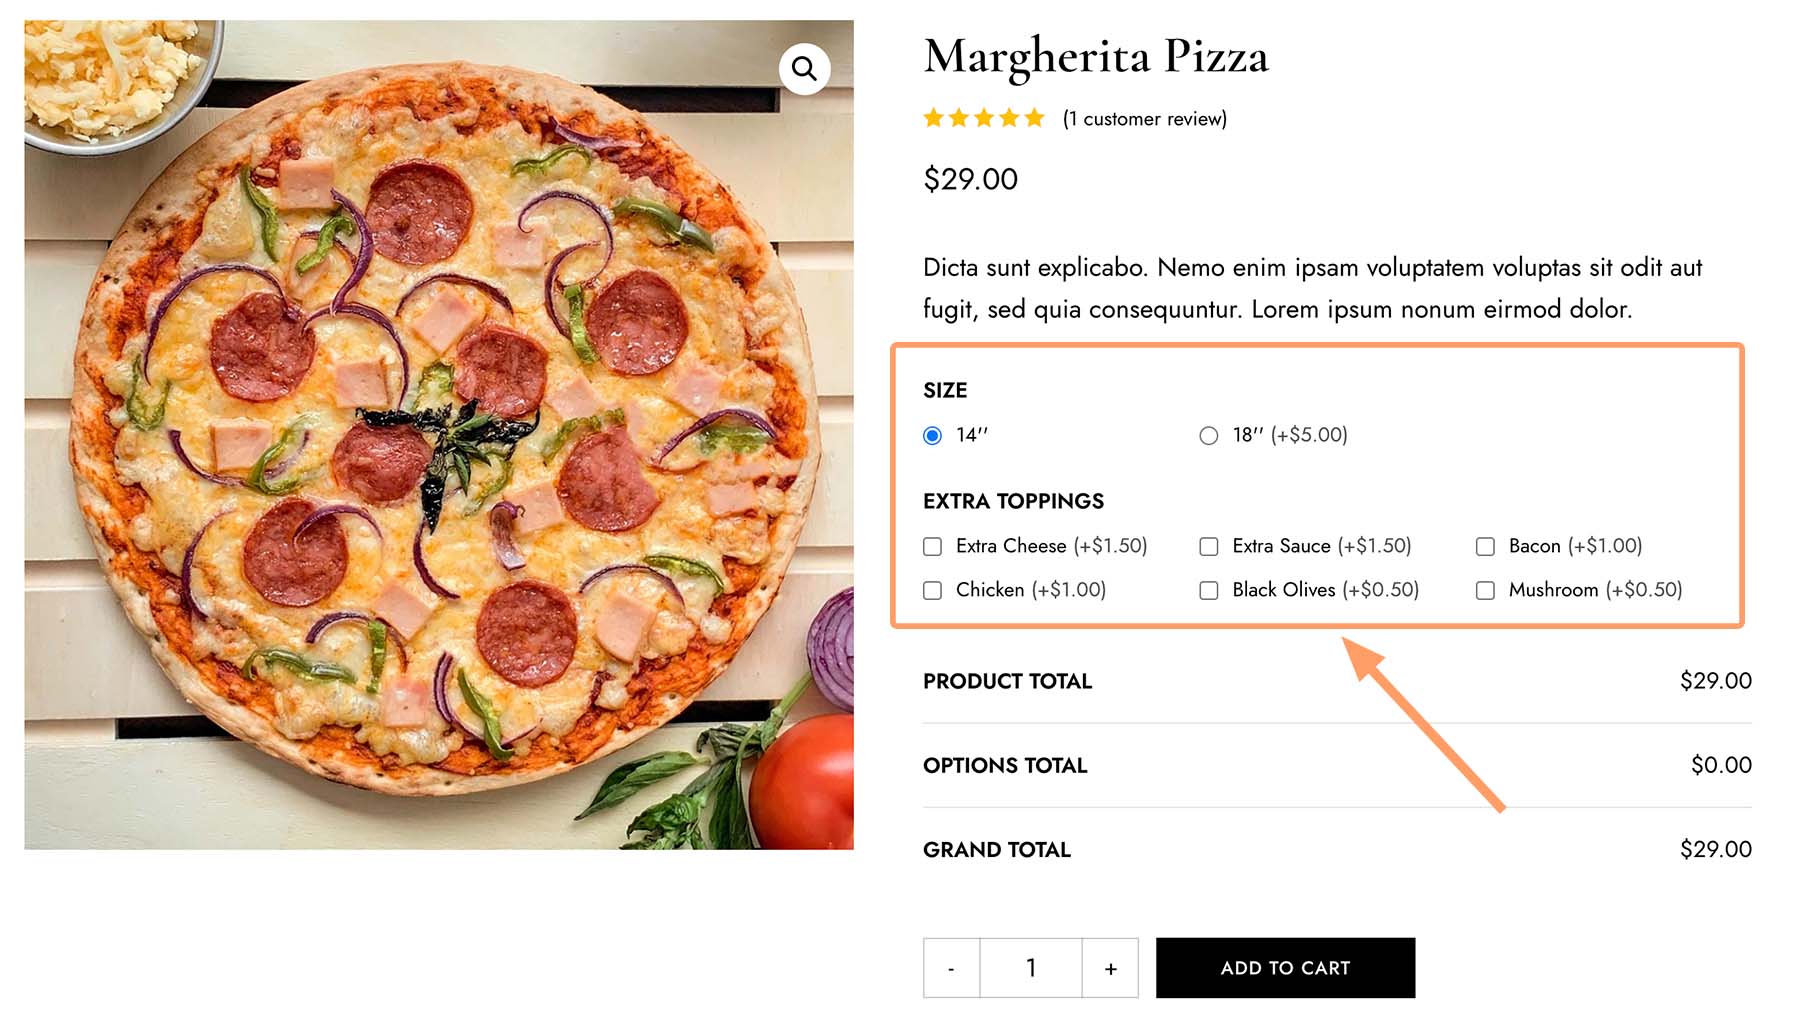 Product with extra fields, such as pizza size, topping, etc.